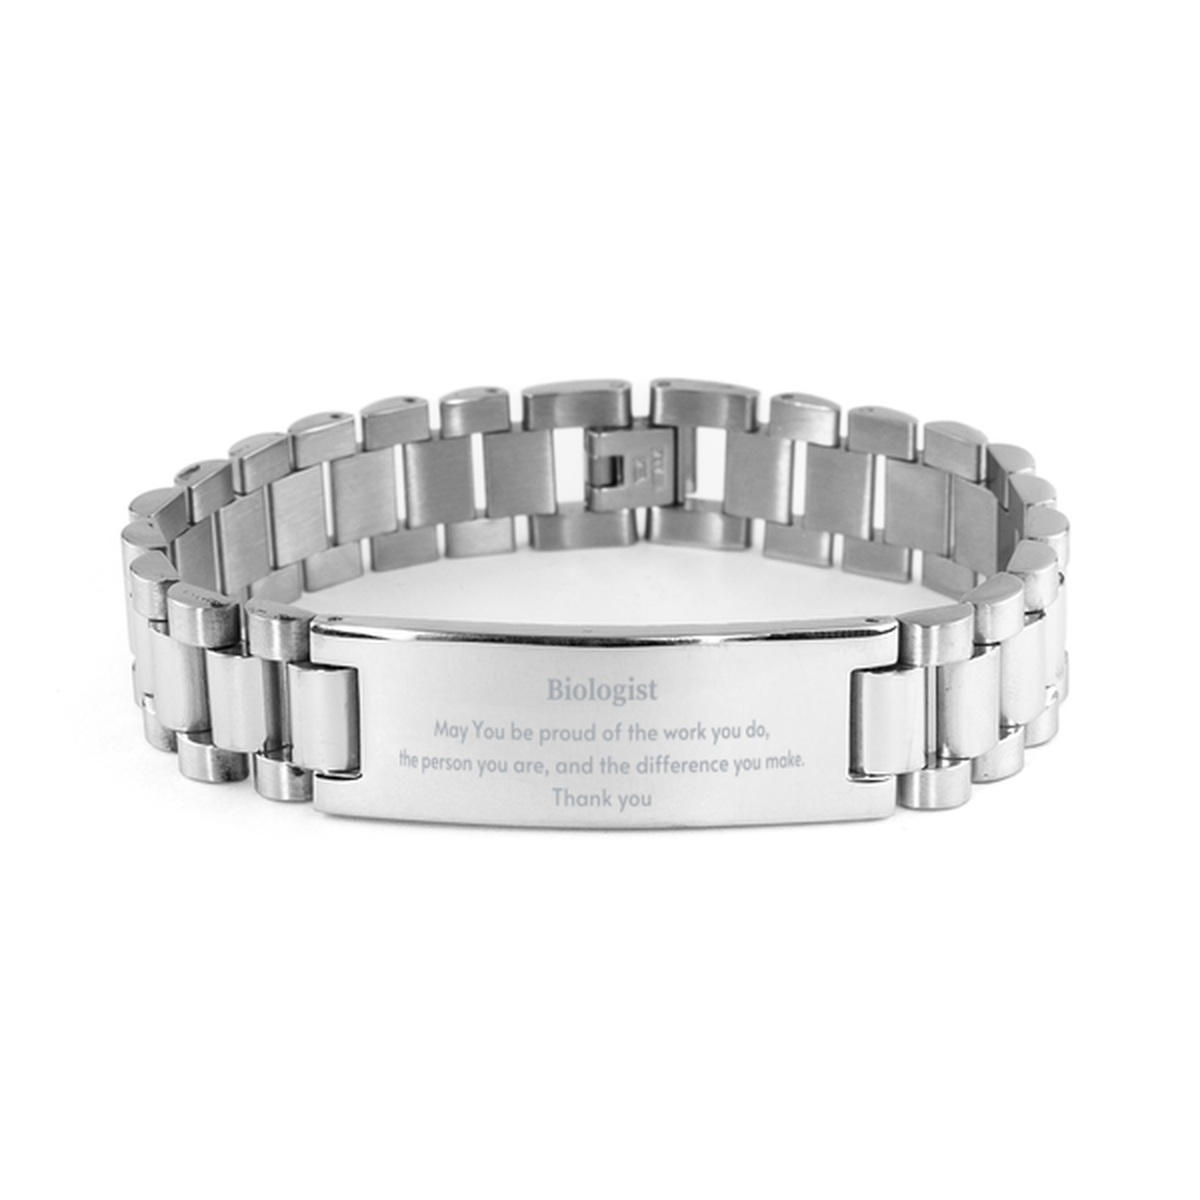 Heartwarming Ladder Stainless Steel Bracelet Retirement Coworkers Gifts for Biologist, Biologist May You be proud of the work you do, the person you are Gifts for Boss Men Women Friends